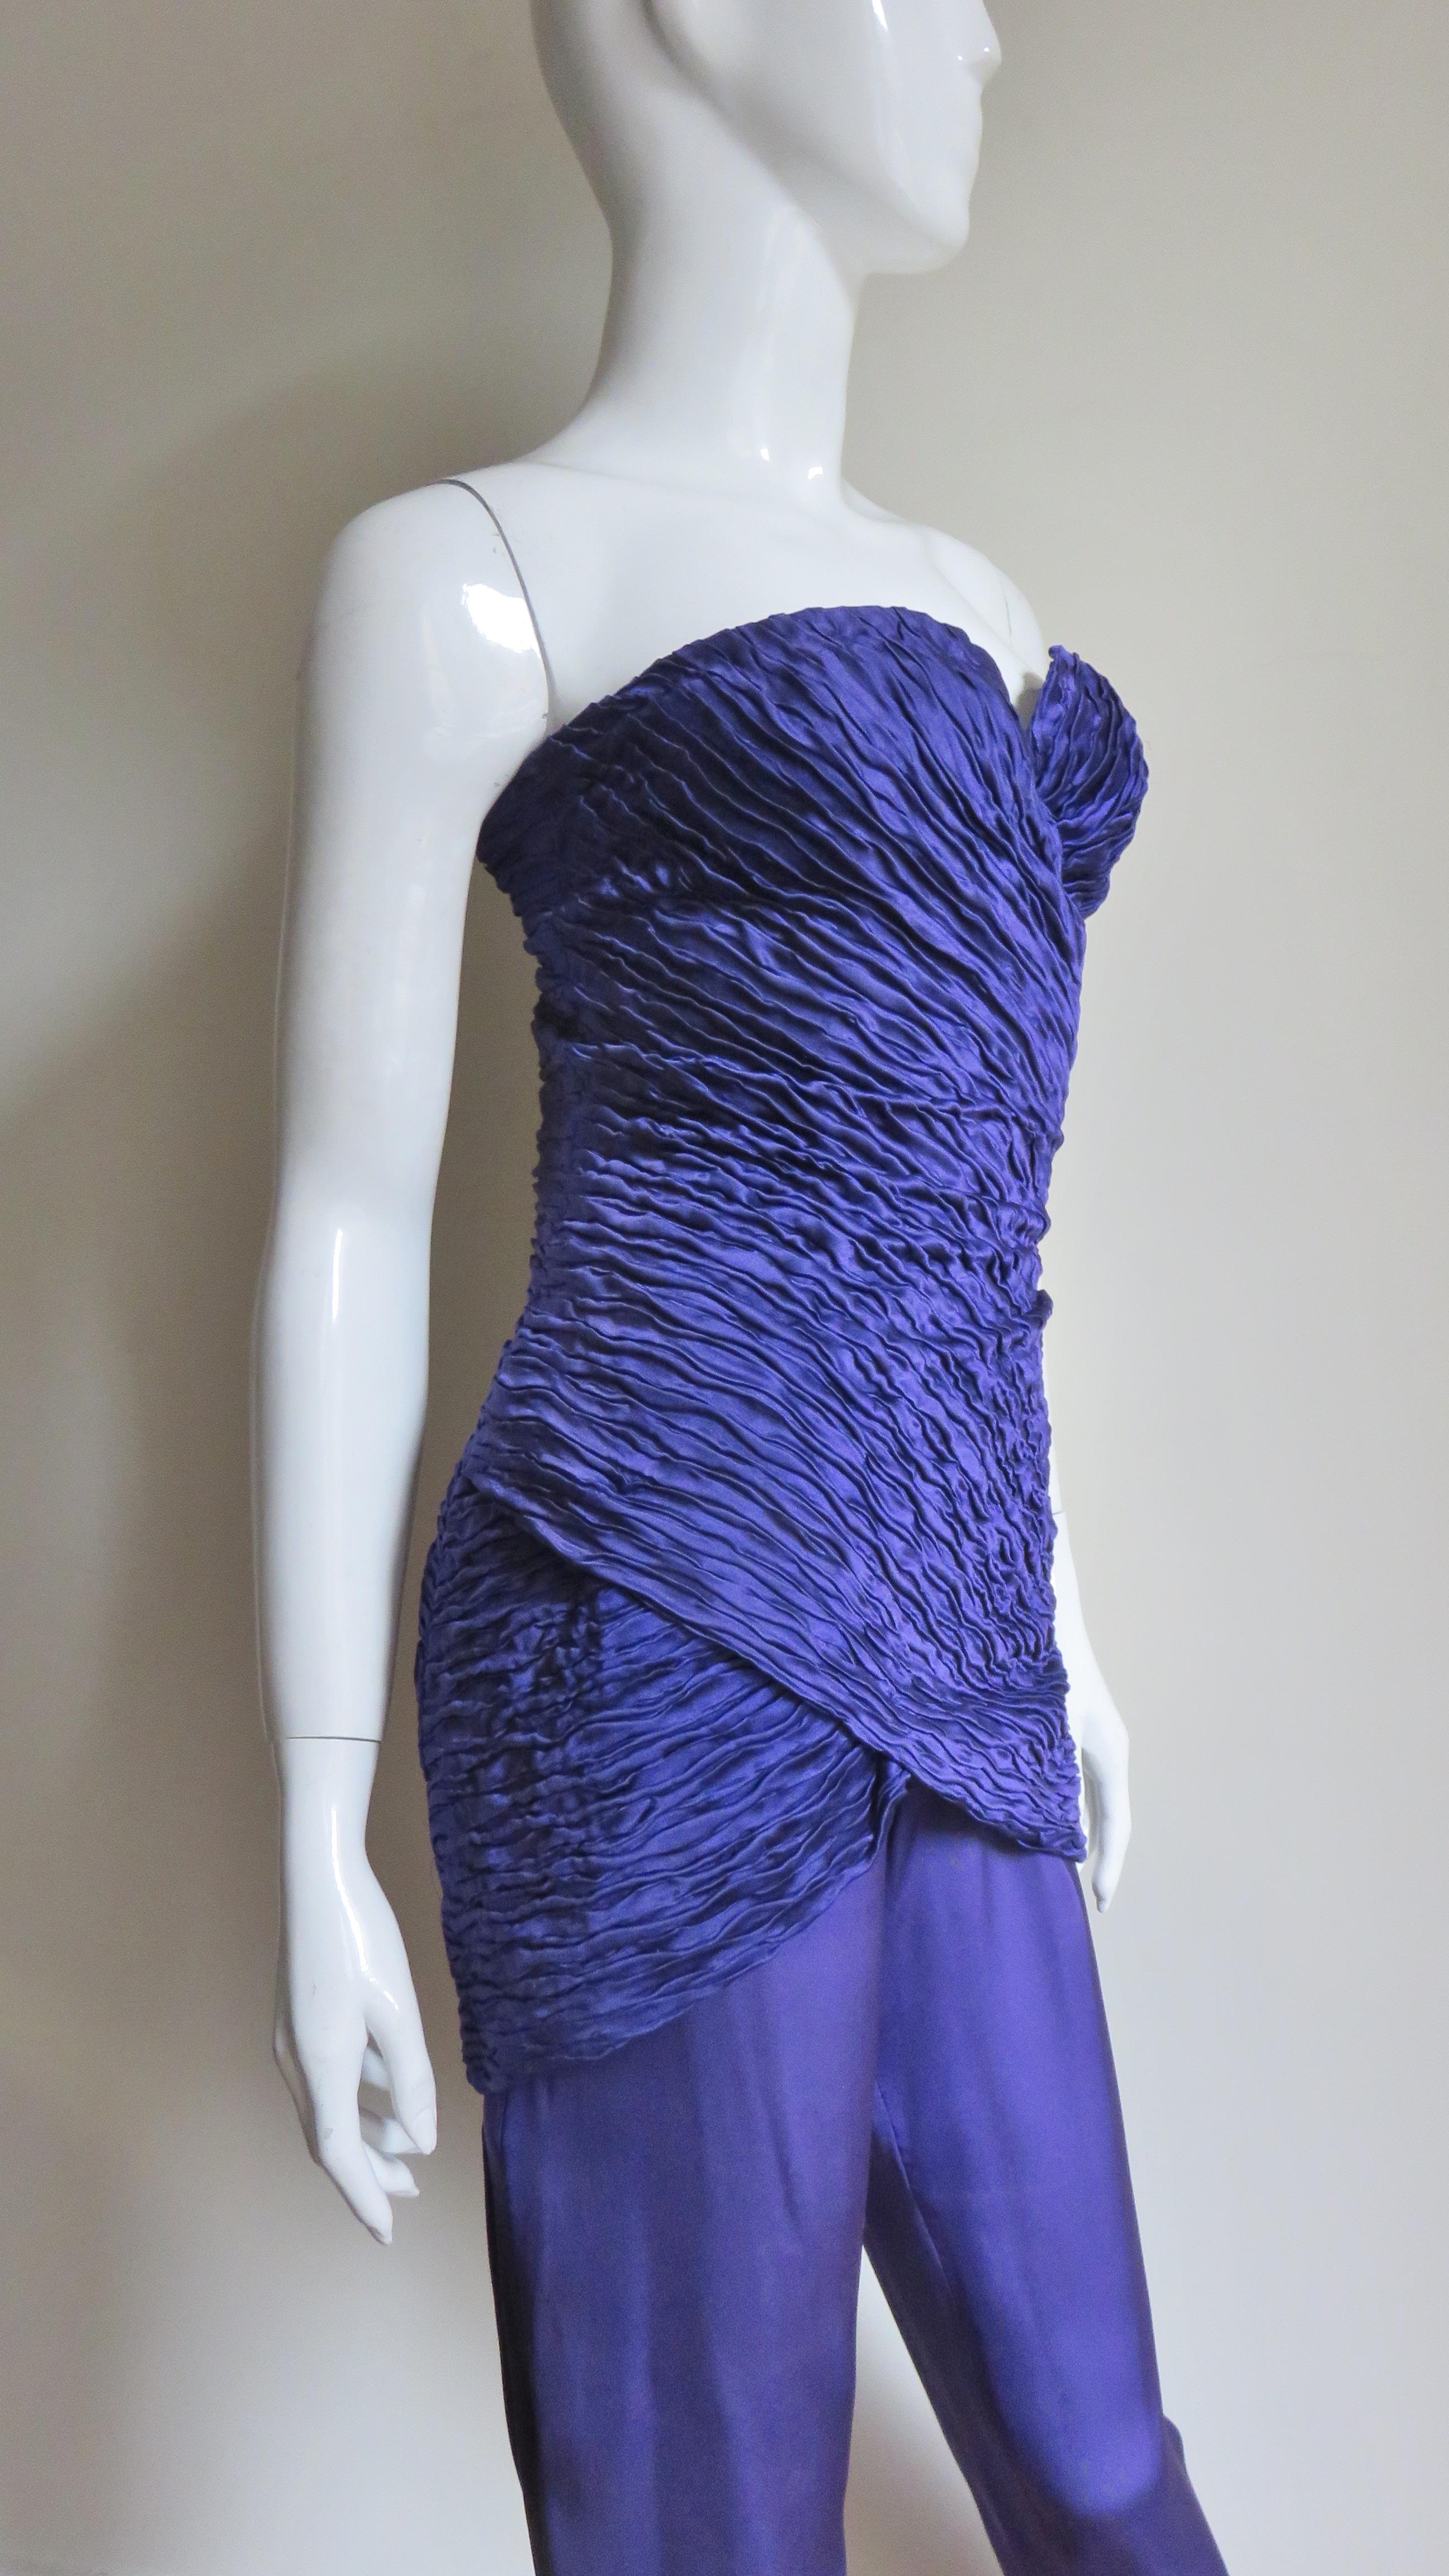 Gianni Versace Silk Strapless Jumpsuit 1980s In Good Condition For Sale In Water Mill, NY